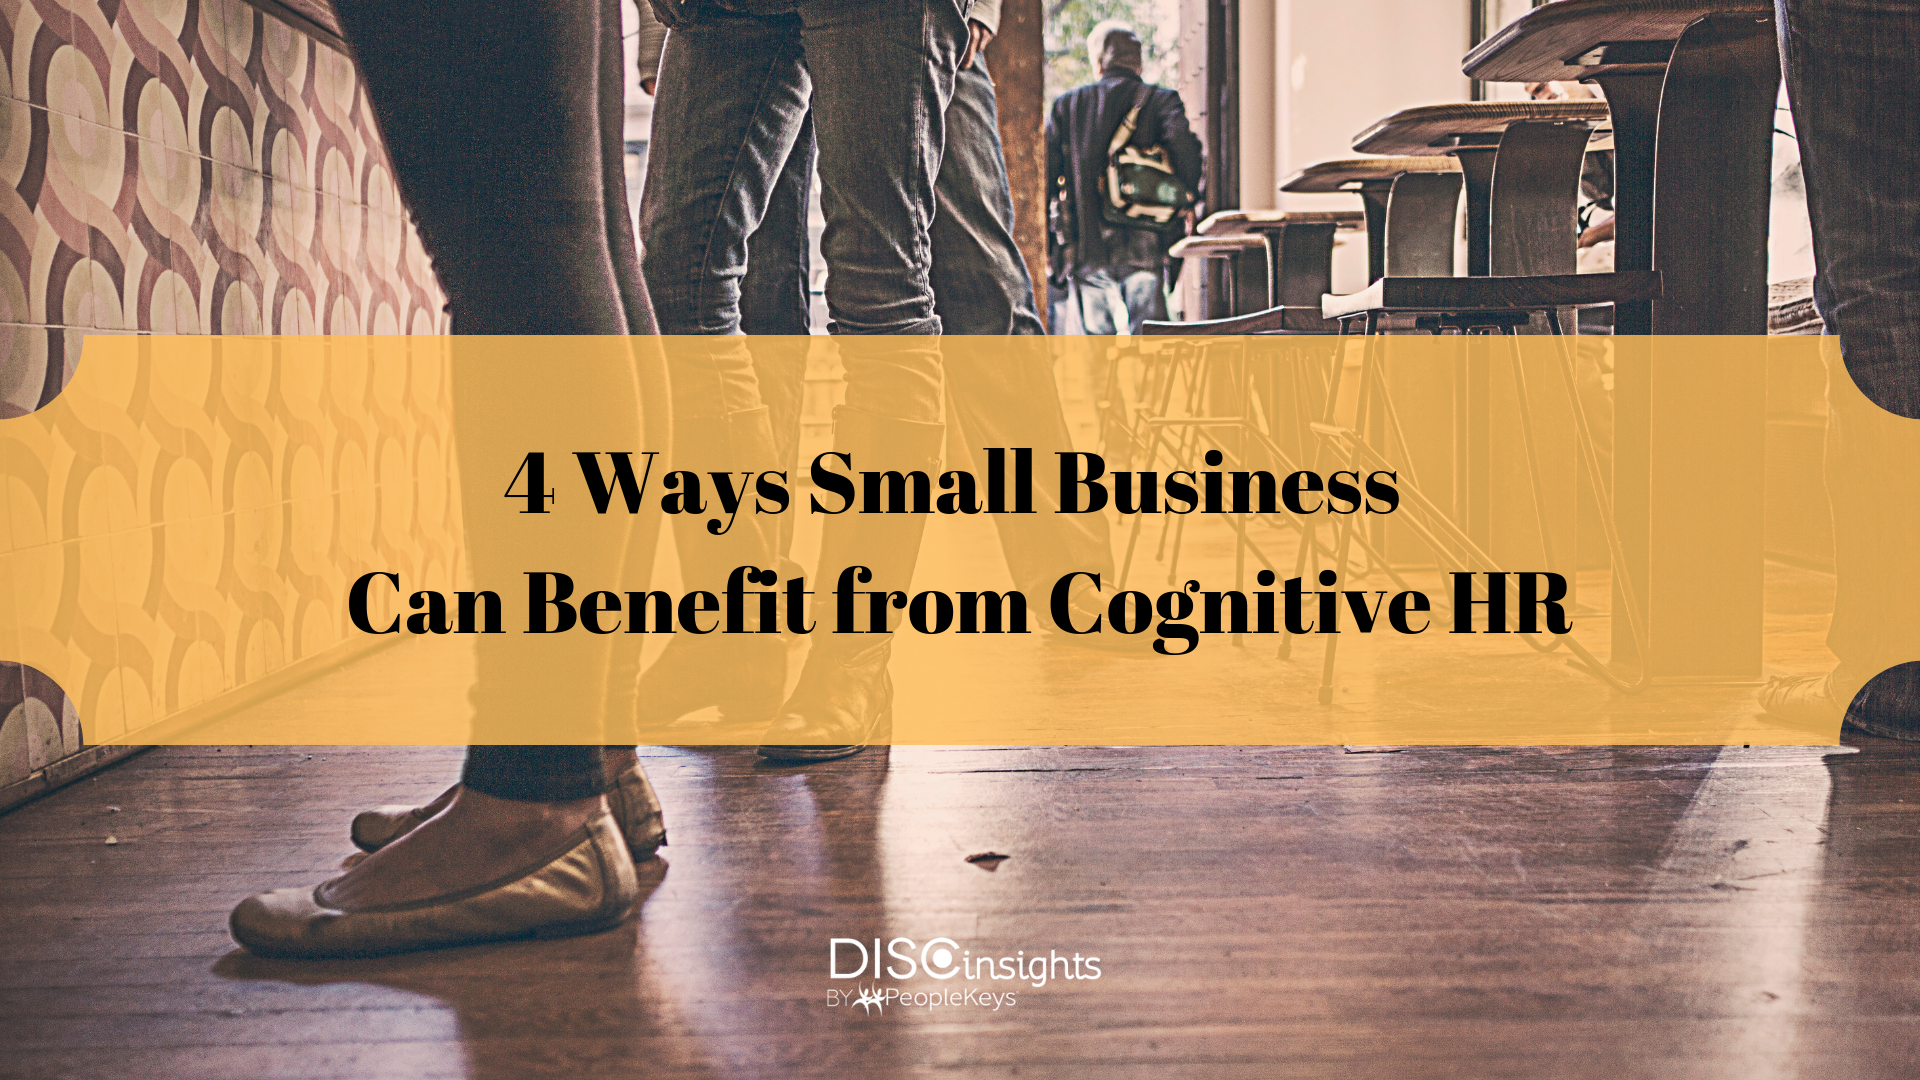 4 Ways Small Business Can Benefit from Cognitive HR